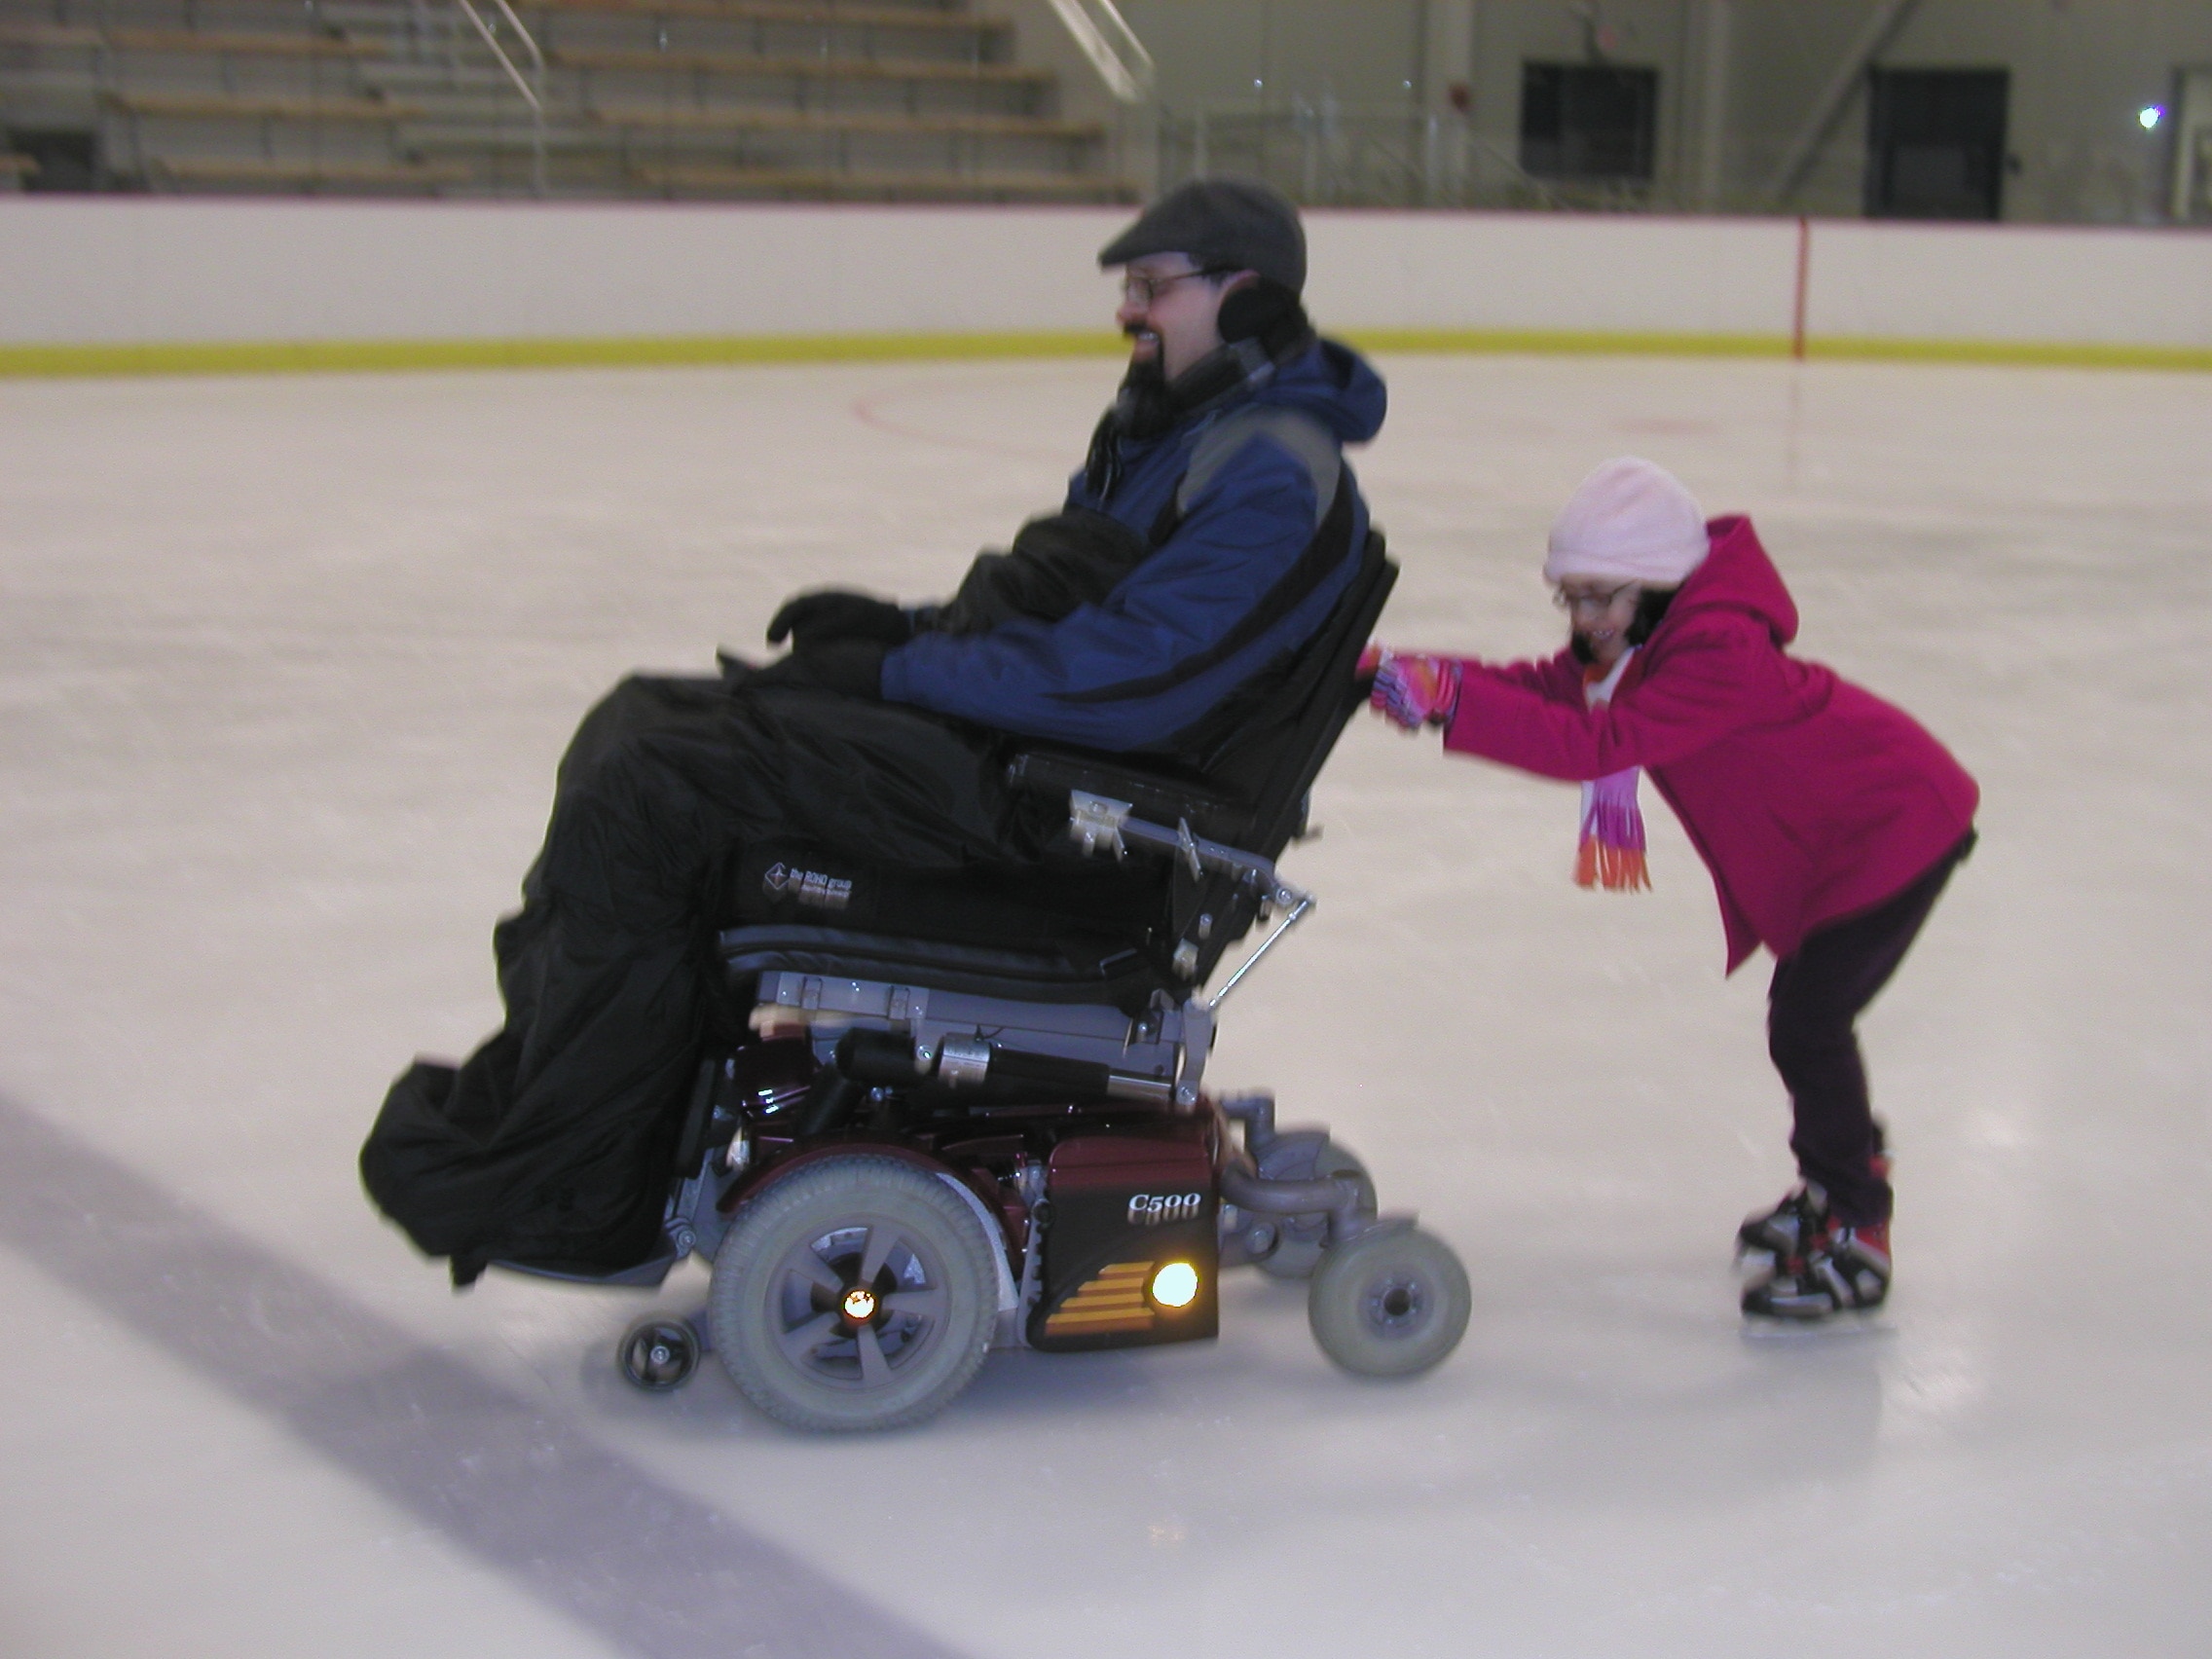 A power chair user is towing a child on skates, who is holding on to the back of the chair.